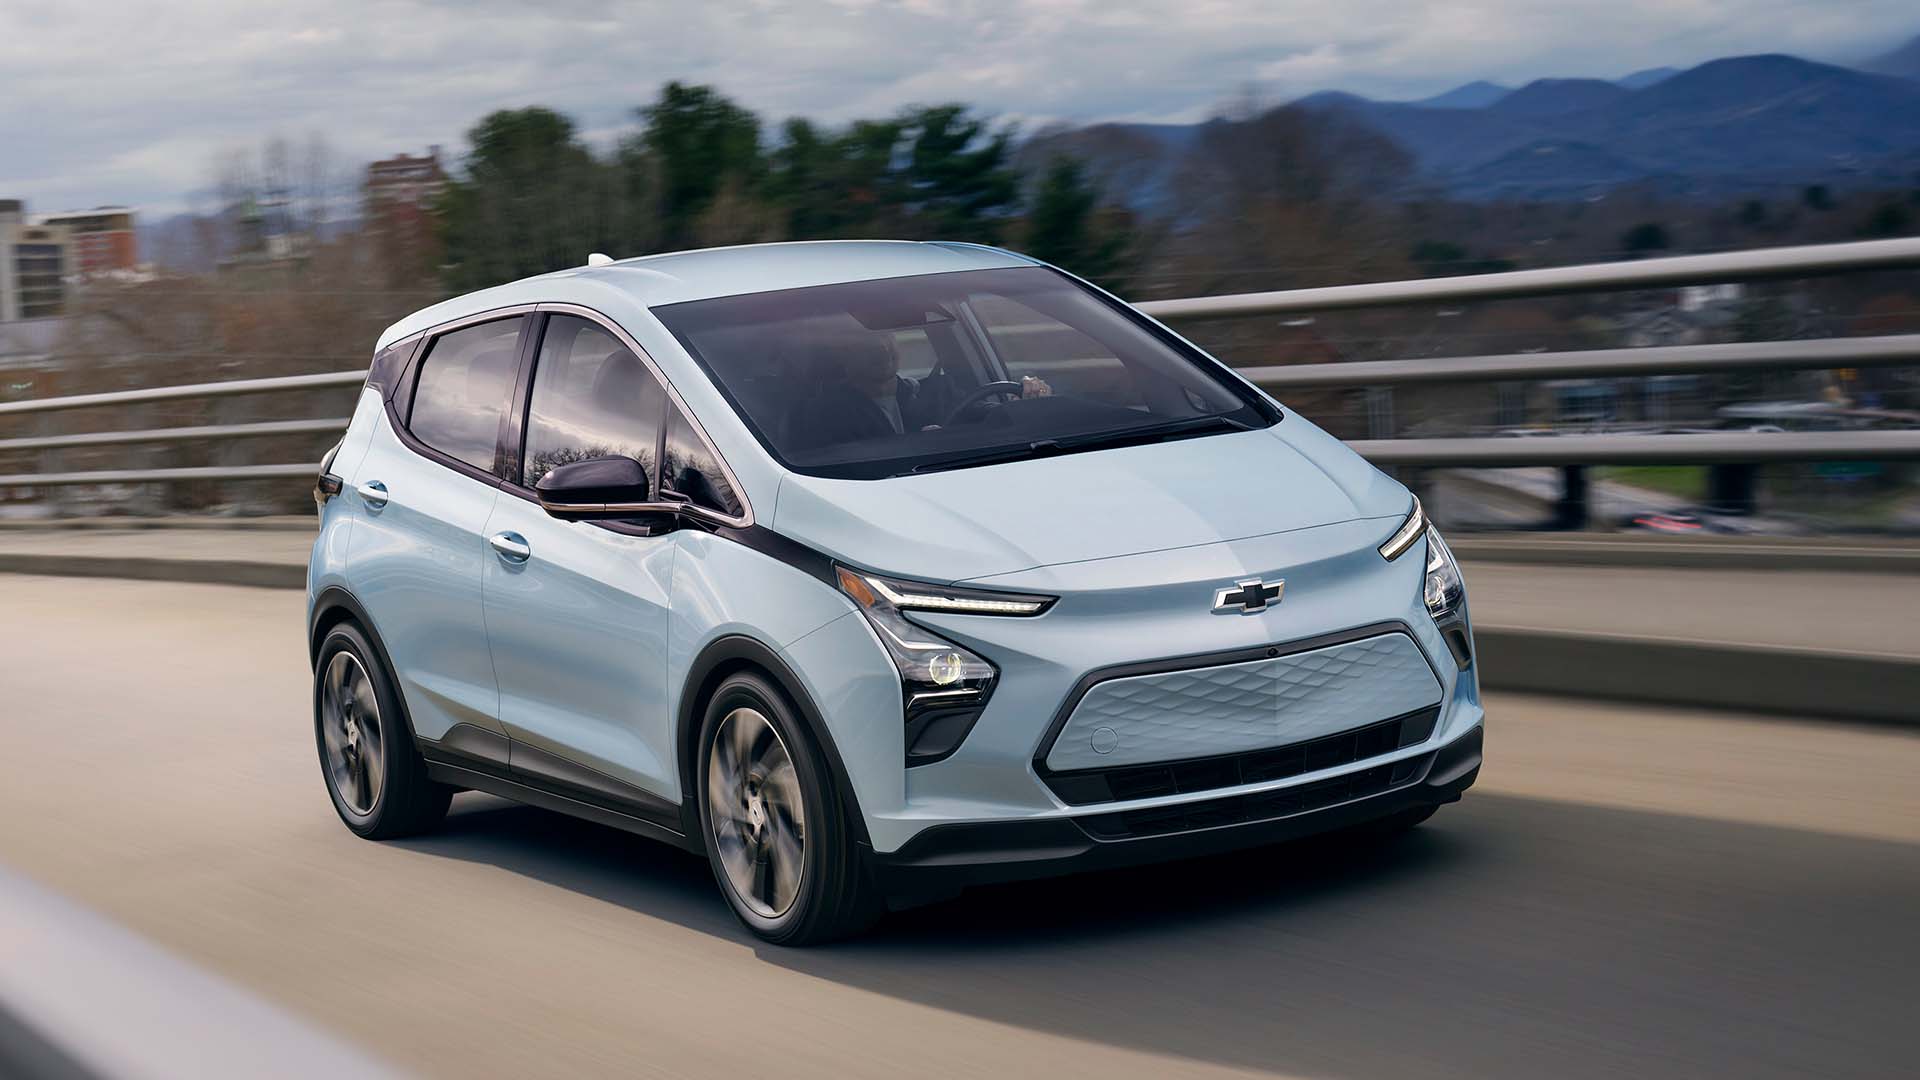 Chevy Bolt EV and Bolt EUV Production Is Ending This Year